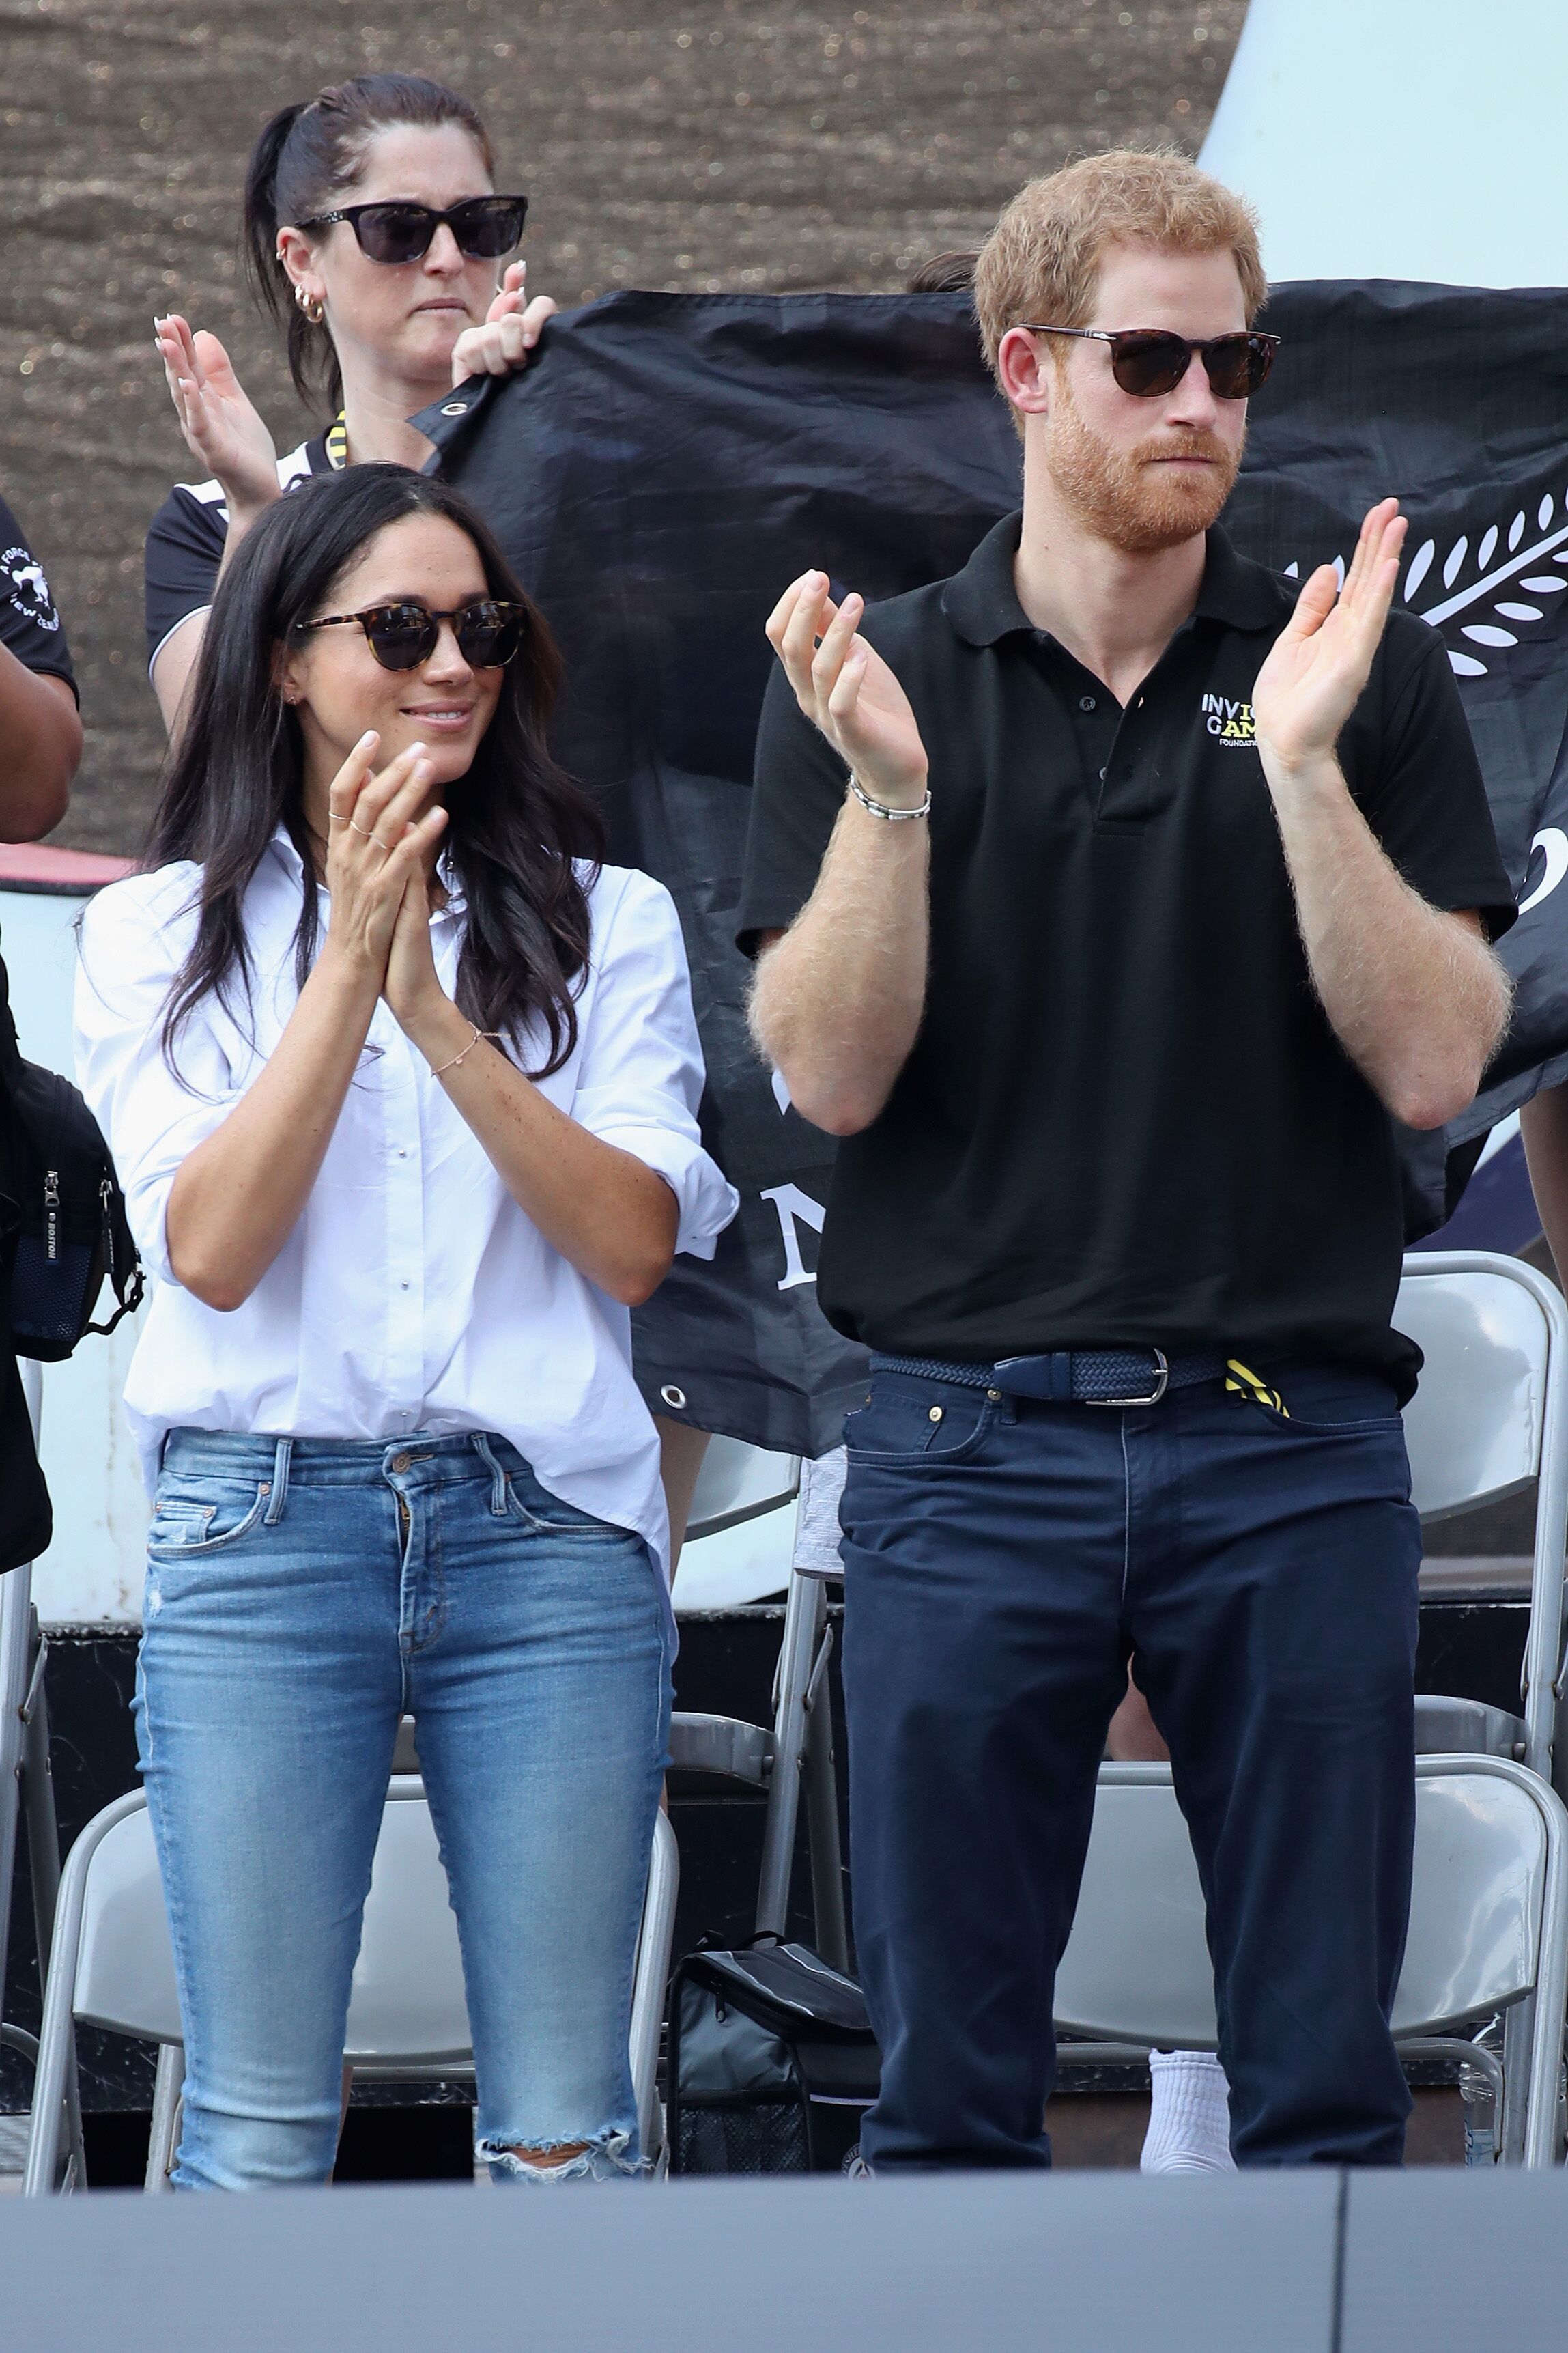 Duchess Meghan and Prince Harry at a Wheelchair Tennis match during the Invictus Games on September 25, 2017, in Toronto, Canada | Photo: Chris Jackson/Getty Images 